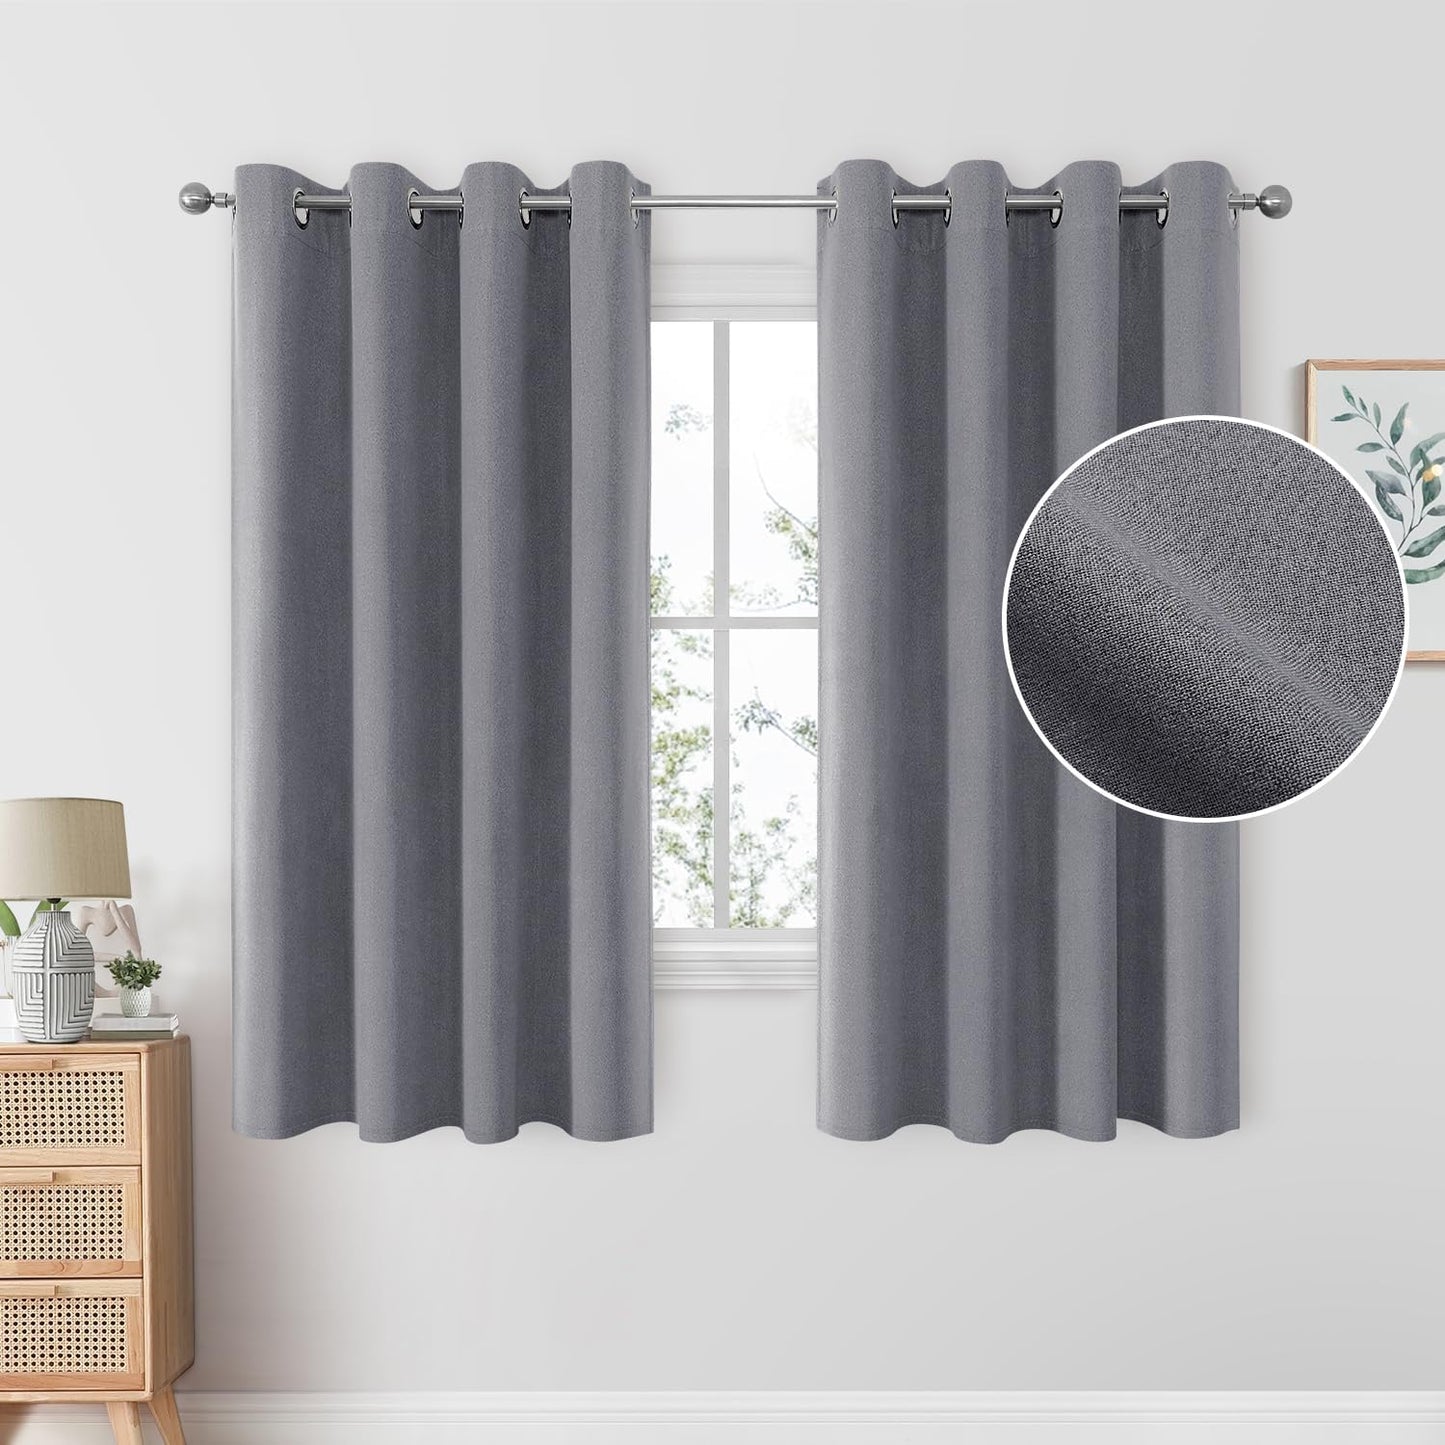 HOMEIDEAS 100% Blush Pink Linen Blackout Curtains for Bedroom, 52 X 84 Inch Room Darkening Curtains for Living, Faux Linen Thermal Insulated Full Black Out Grommet Window Curtains/Drapes  HOMEIDEAS Grey W52" X L63" 